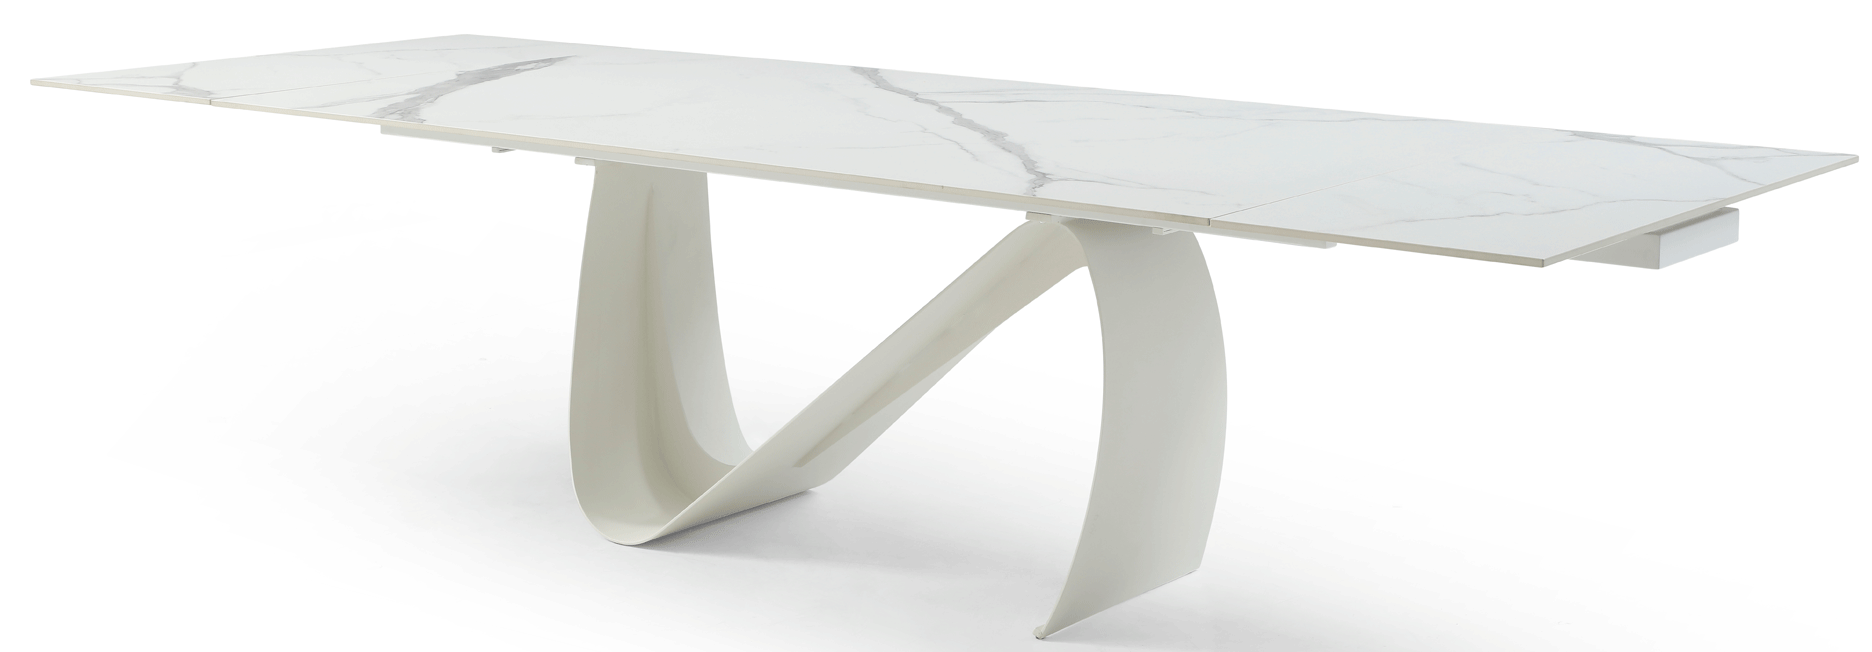 ESF Extravaganza Collection 9087 Dining Table White i37516